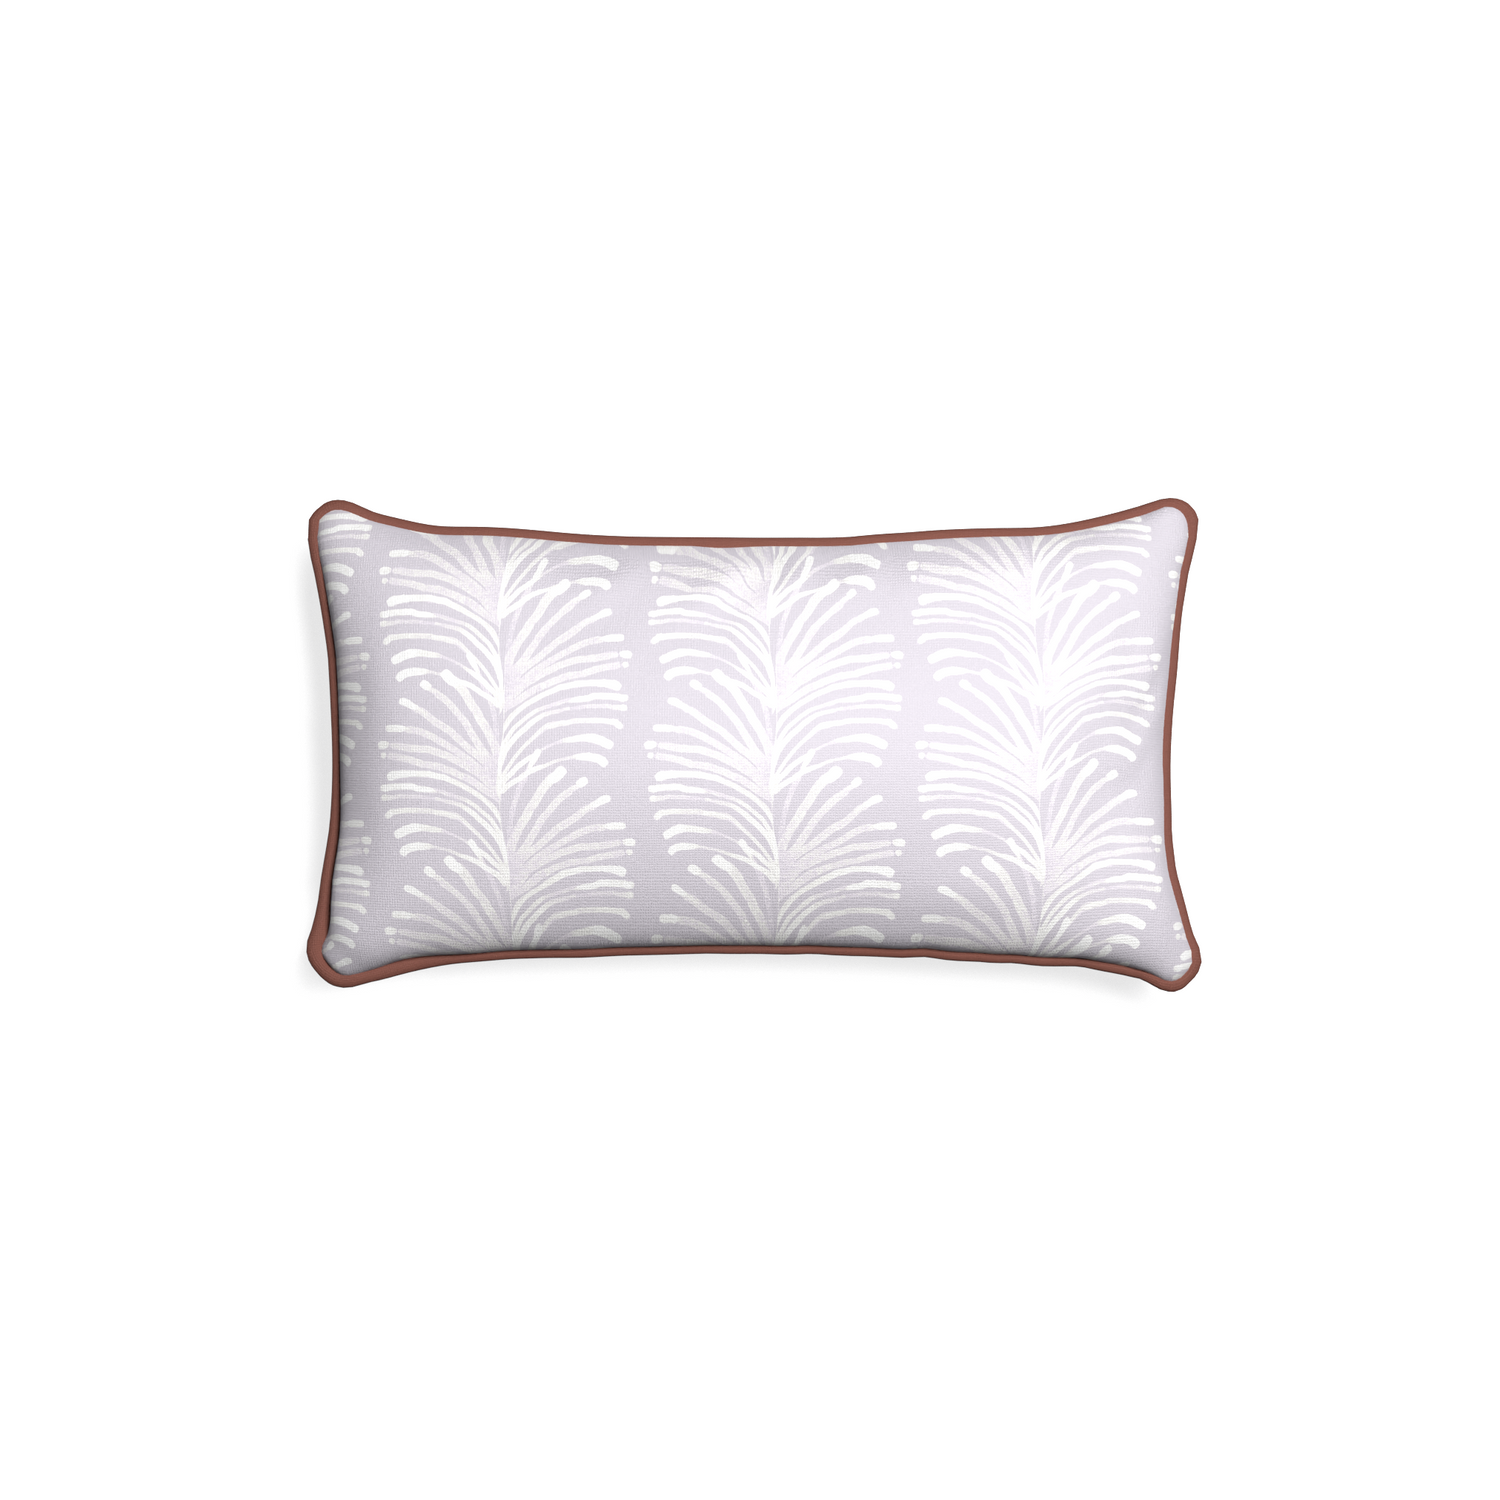 Petite-lumbar emma lavender custom lavender botanical stripepillow with w piping on white background